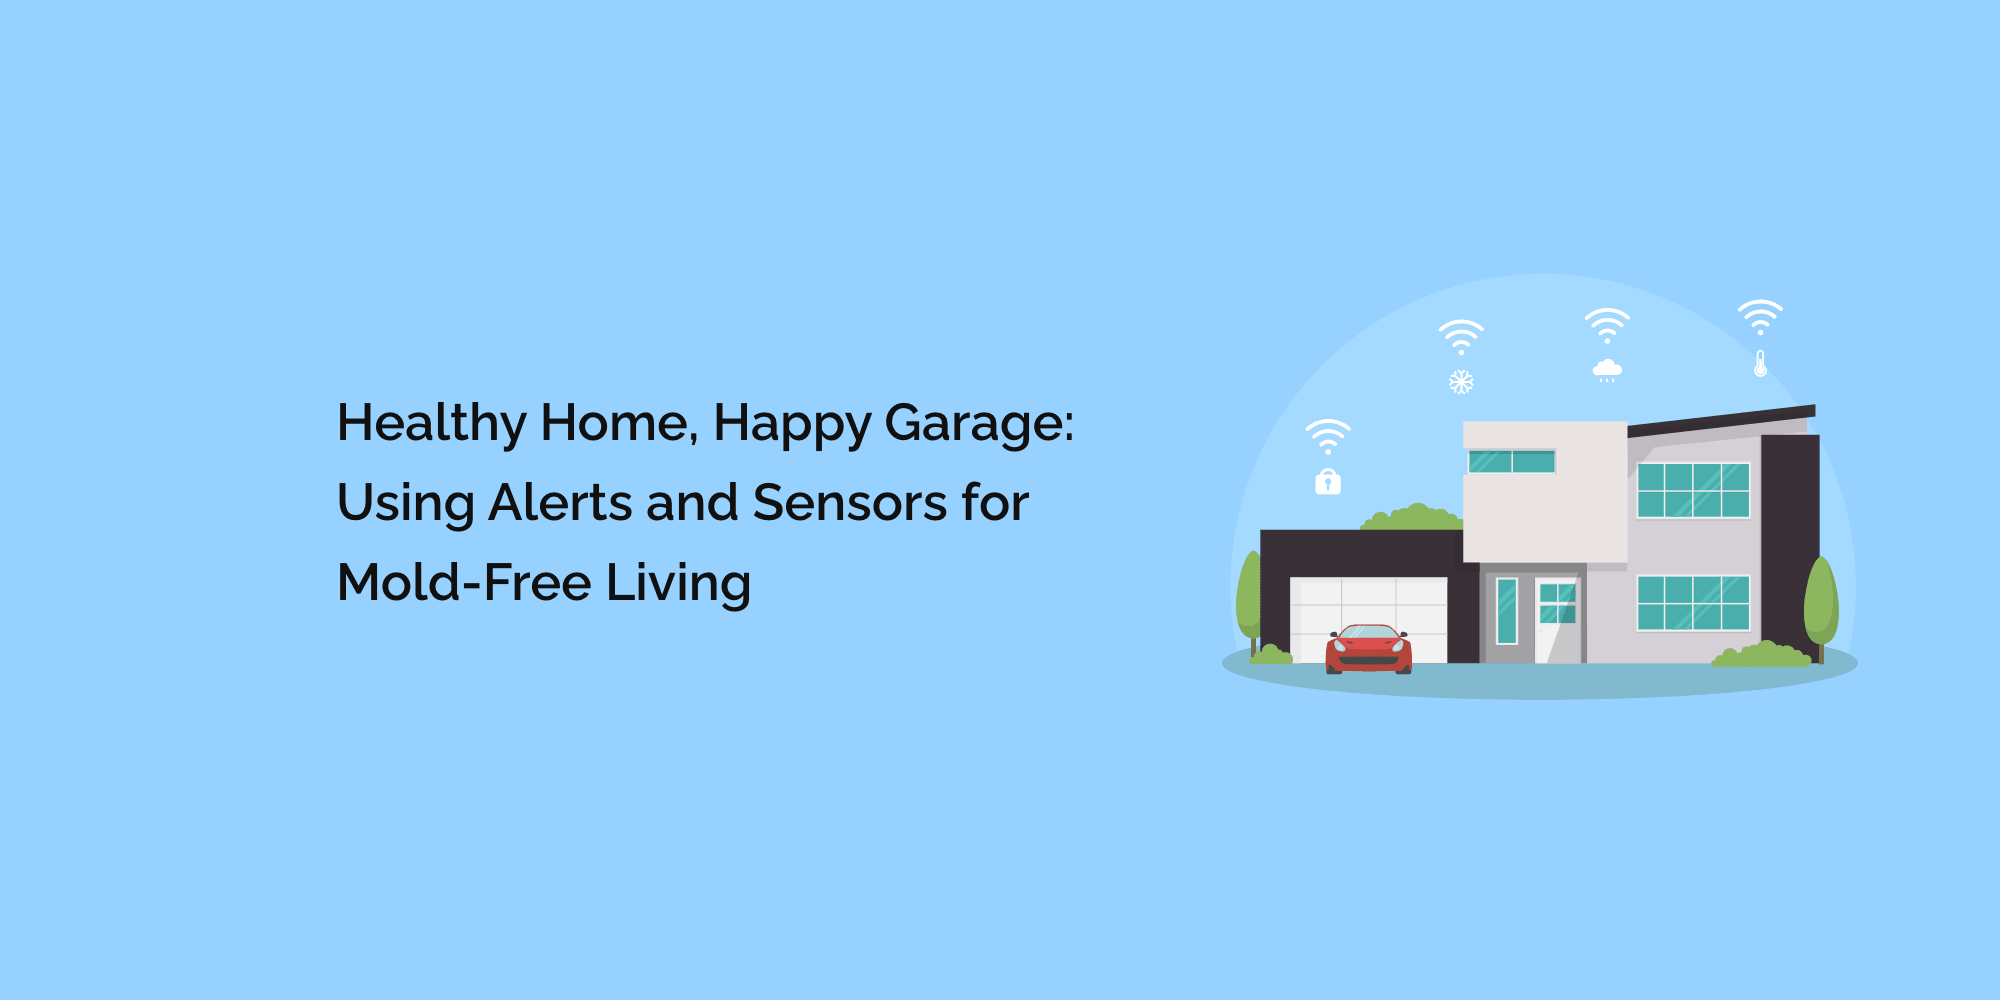 Healthy Home, Happy Garage: Using Alerts and Sensors for Mold-Free Living